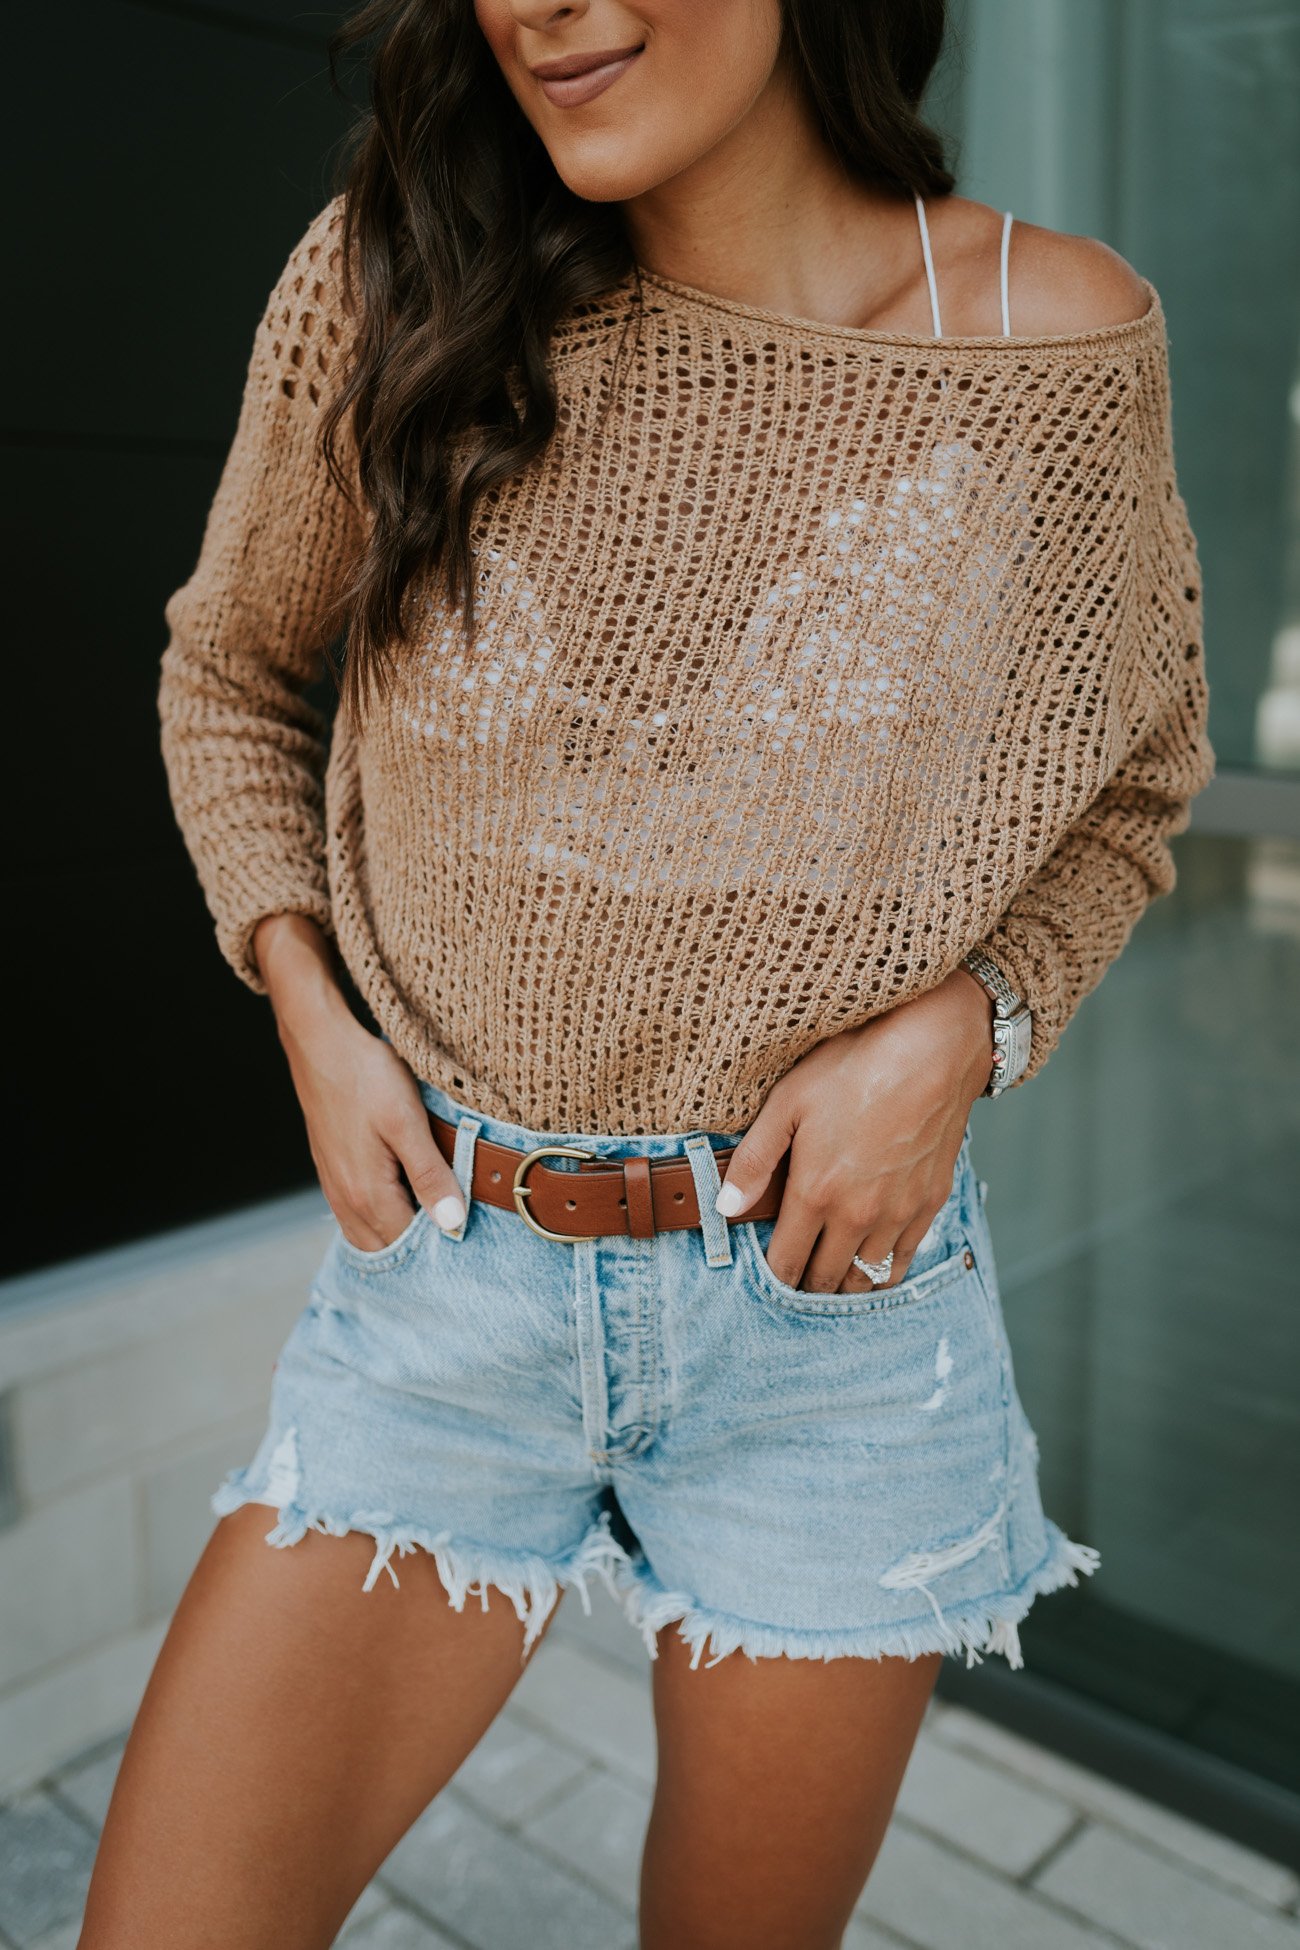 woven pullover, agolde shorts, agolde cutoff shorts, neutral pullover, 2018 nordstrom anniversary sale public access, shop nordstrom, nordstrom shoes, nordstrom dresses, nordstrom handbag sale, nordstrom anniversary sale dates, Nordstrom Anniversary Sale 2018, nordstrom anniversary sale picks, nordstrom anniversary sale catalog, sale picks for nordstrom anniversary sale 2018, information on nordstrom anniversary sale, nordstrom credit card, nordstrom debit card, nordstrom rewards, nordstrom sale, nordstrom anniversary sale finds, nsale finds, nsale picks, nike on sale, cute fall outfit, fall style, fall inspo, fall sale, nordstrom anniversary sale public access, 2018 nordstrom anniversary sale public access // grace wainwright a southern drawl